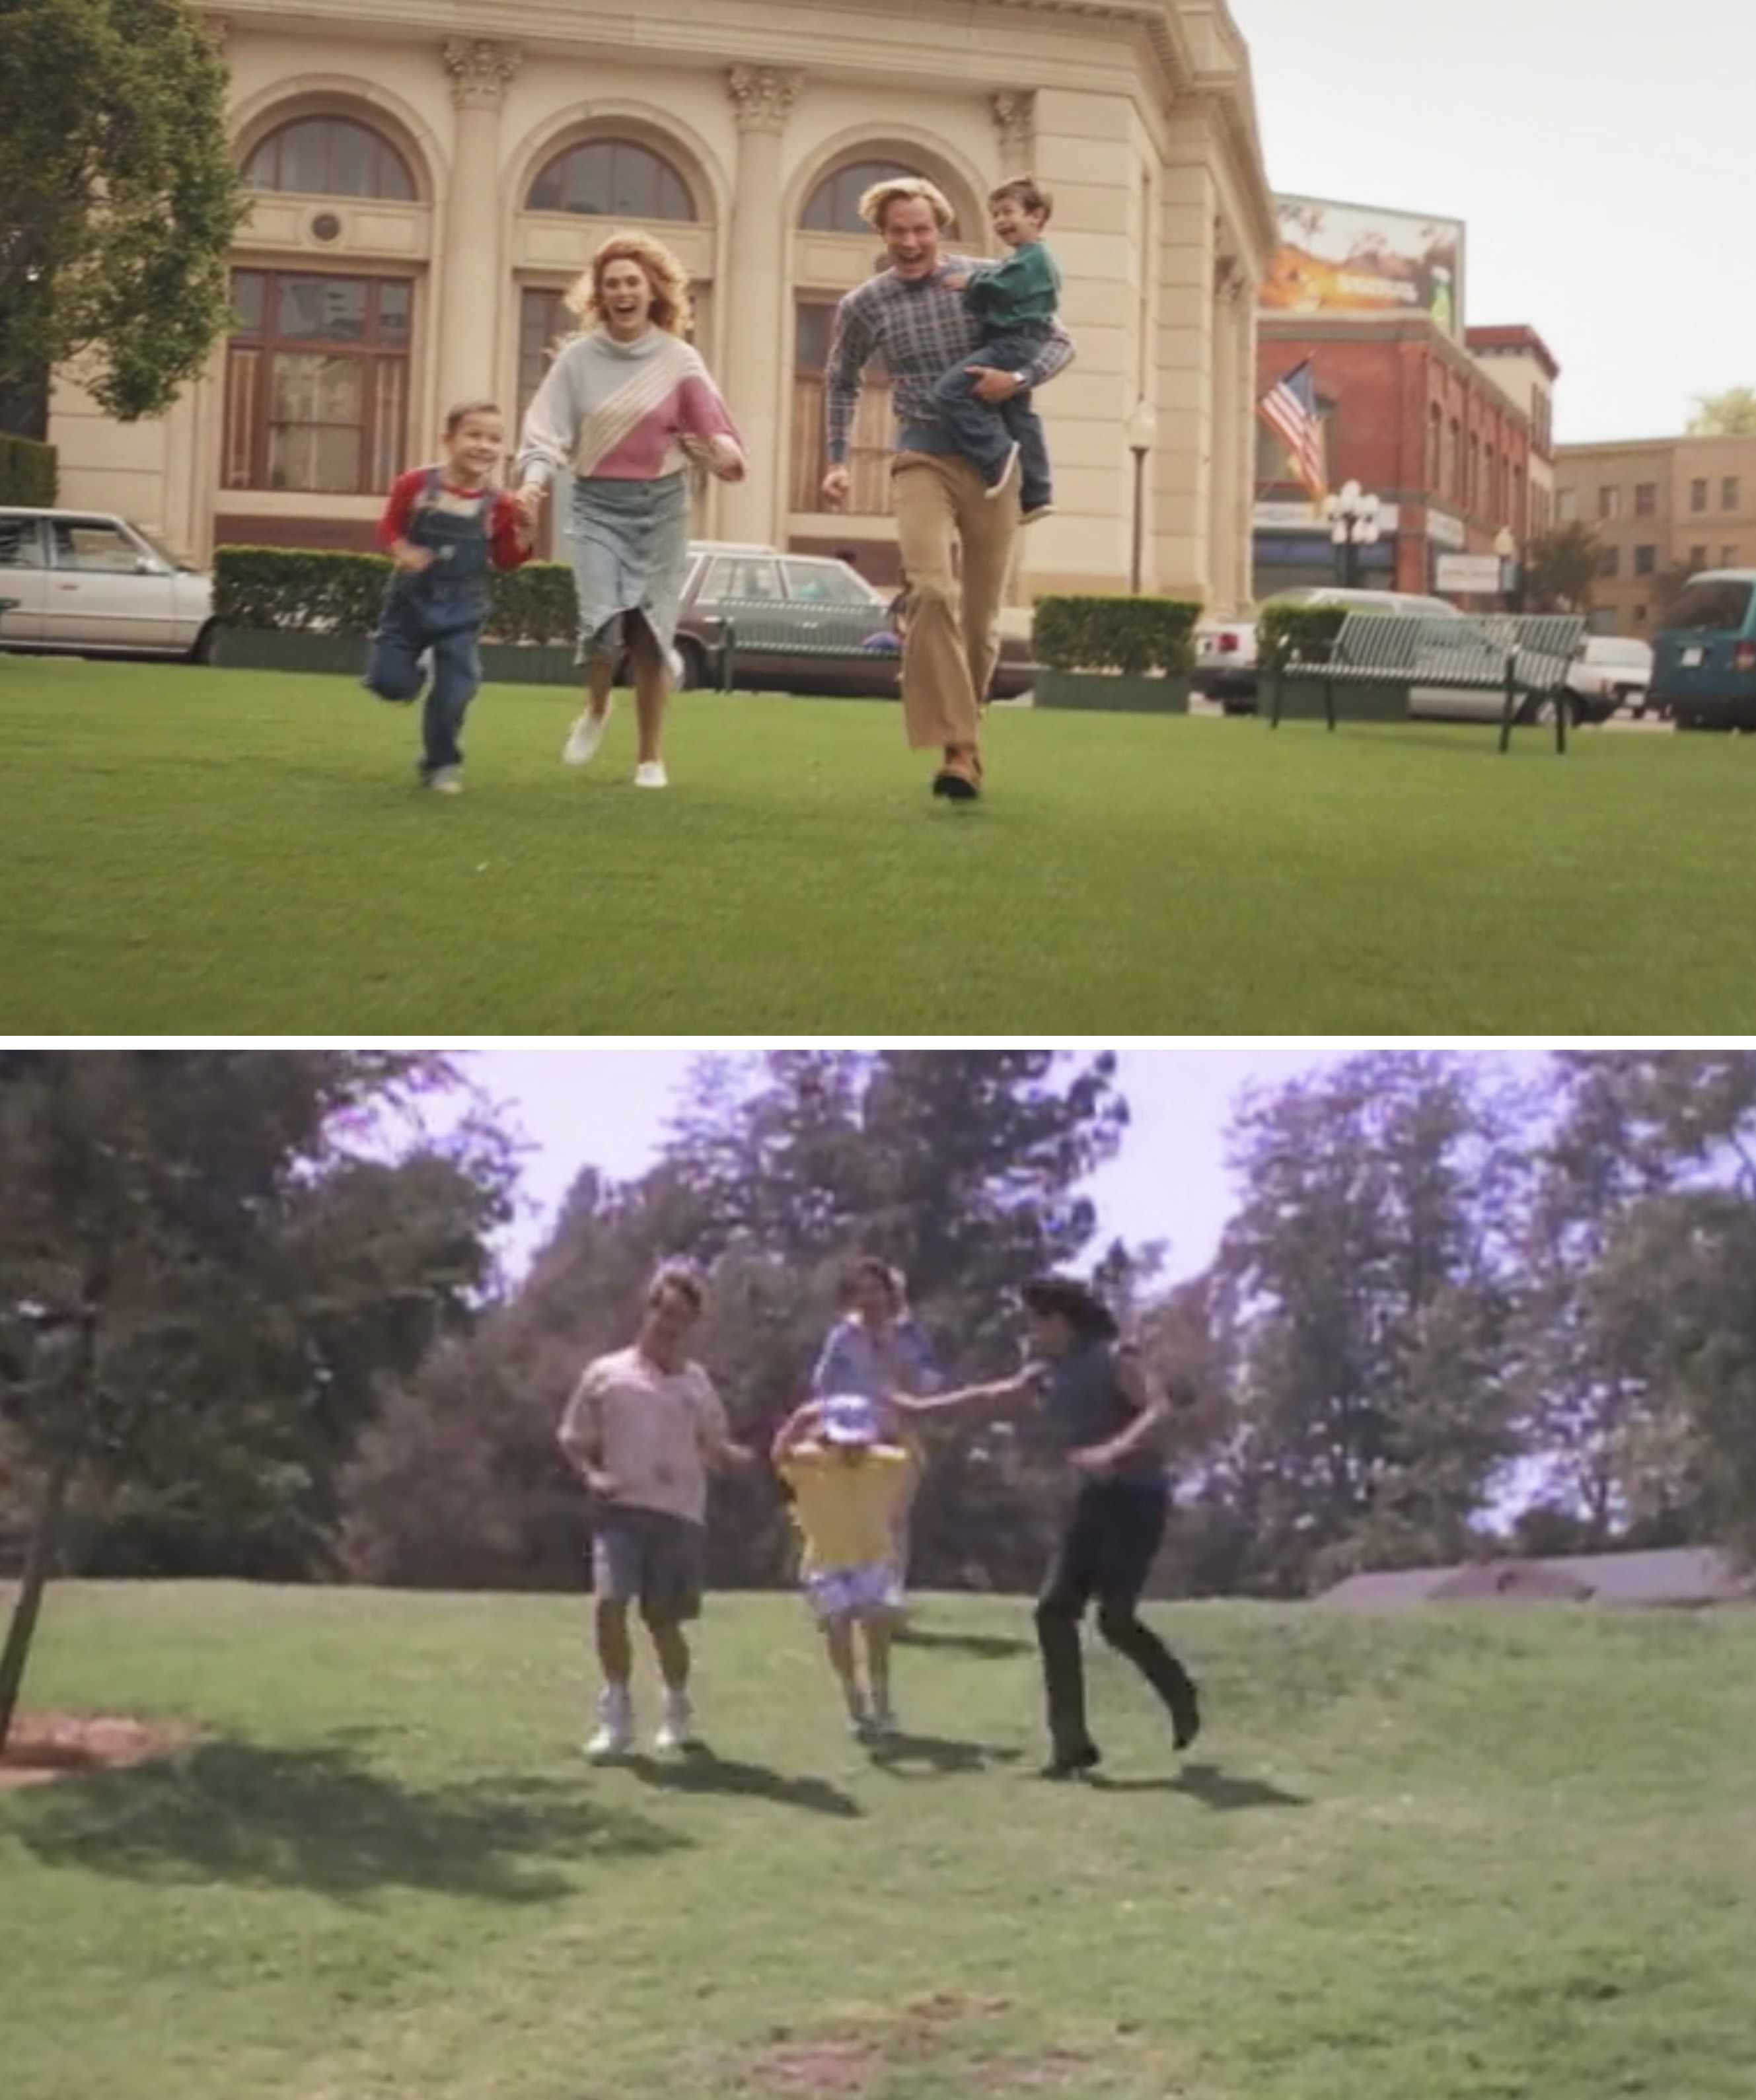 Wanda, Billy, Tommy, and Vision running at the camera vs. the Tanners running at the camera in &quot;Full House&quot;